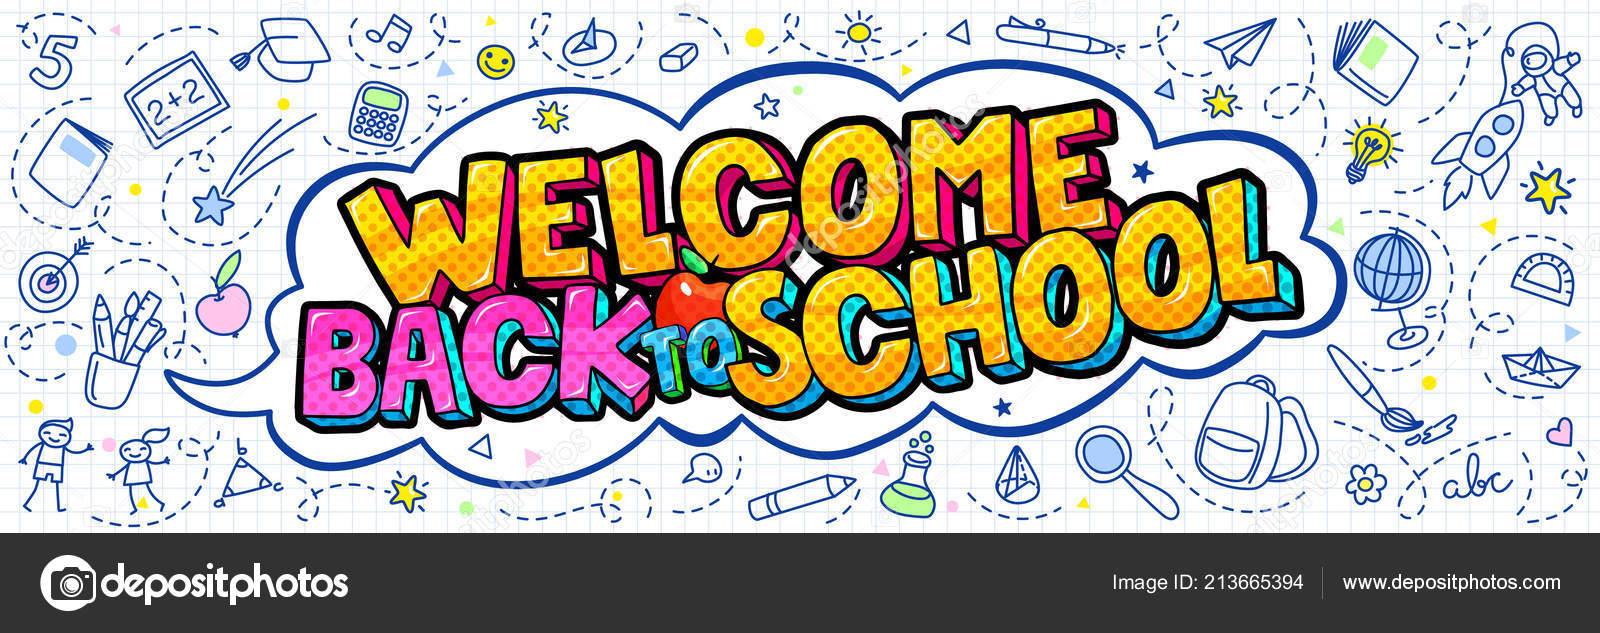 Welcome Back School Lettering Pop Art Style White Background School Vector Image By C Vectorstory Vector Stock